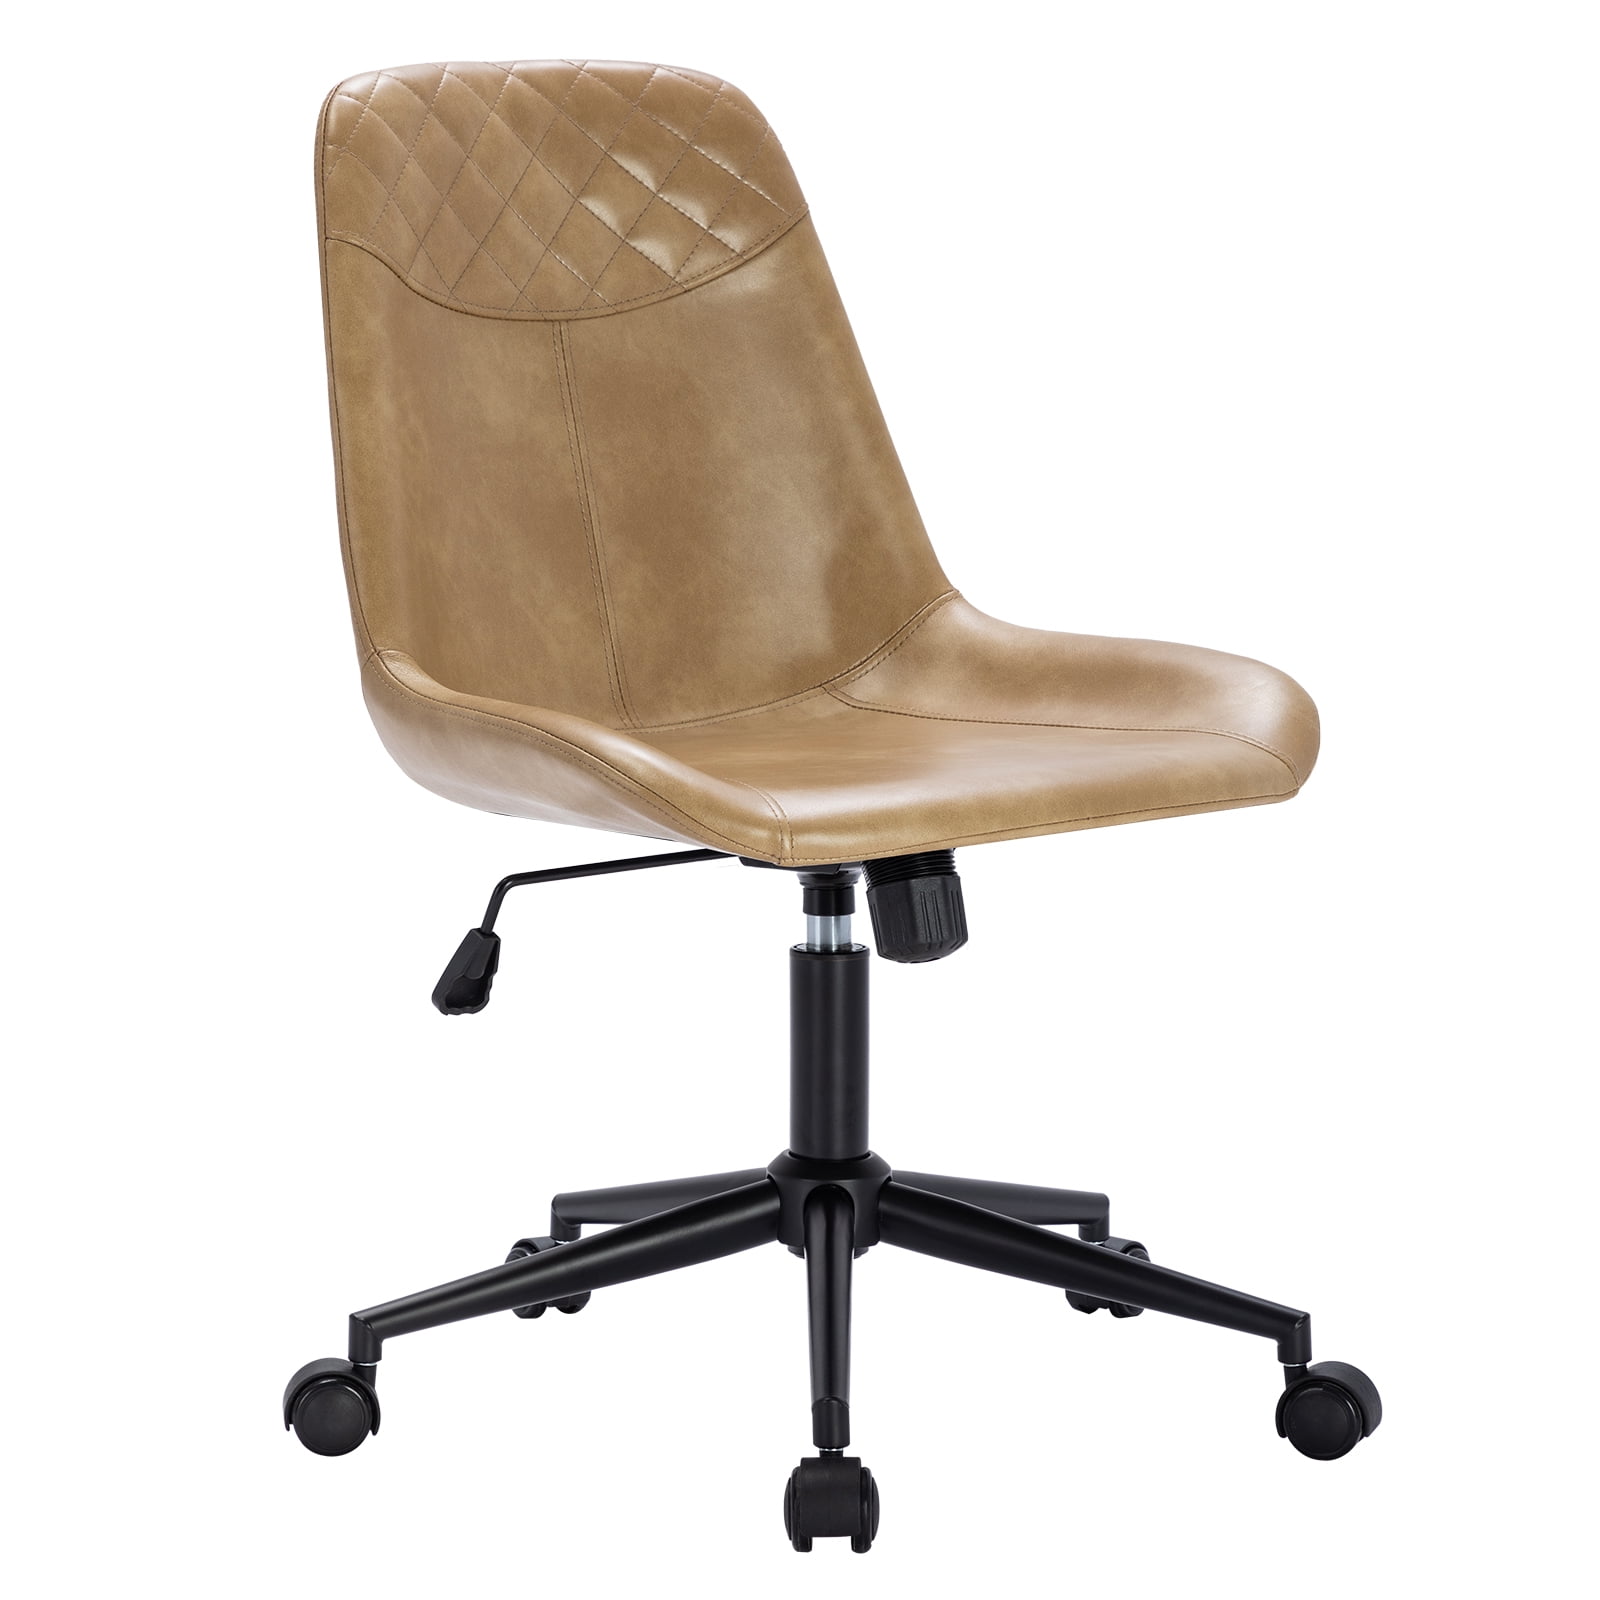 Duhome Modern Home Office Chair Darkbrown Task Chair Faux Leather Swivel Height Adjustable Computer Desk Chair with Black Metal Base Mid Back Arms 